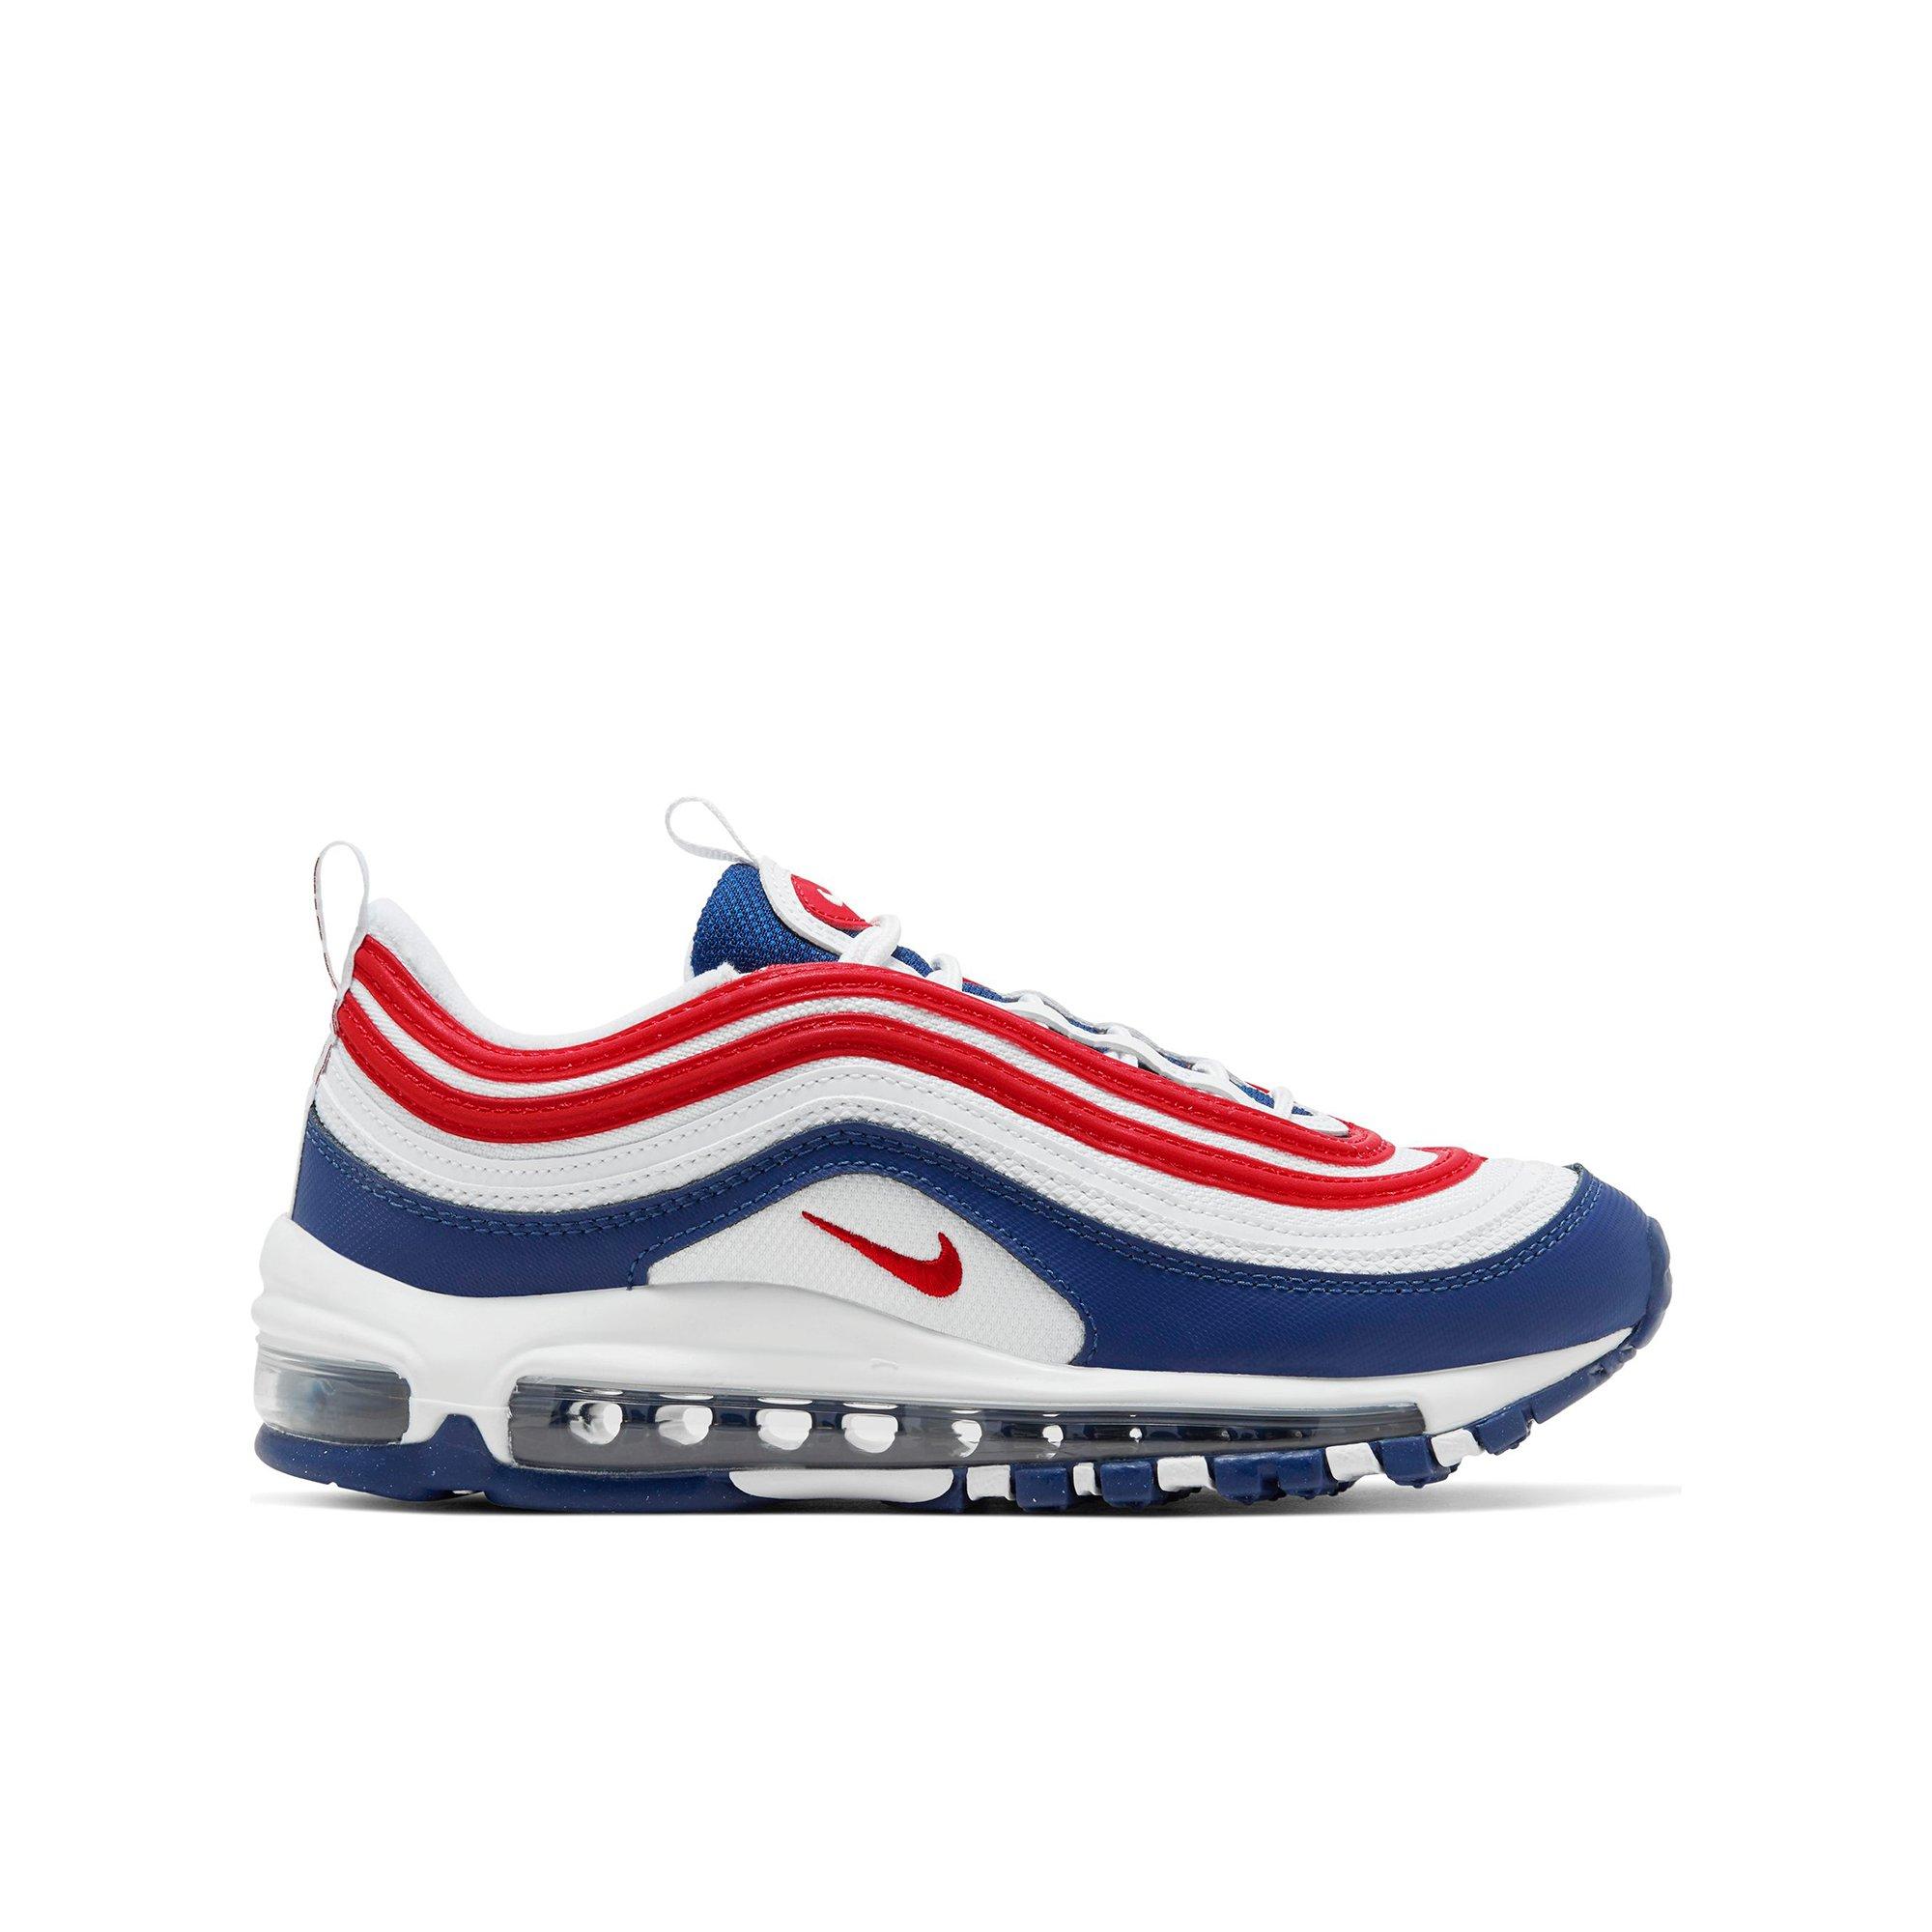 nike air max 97 navy blue and red